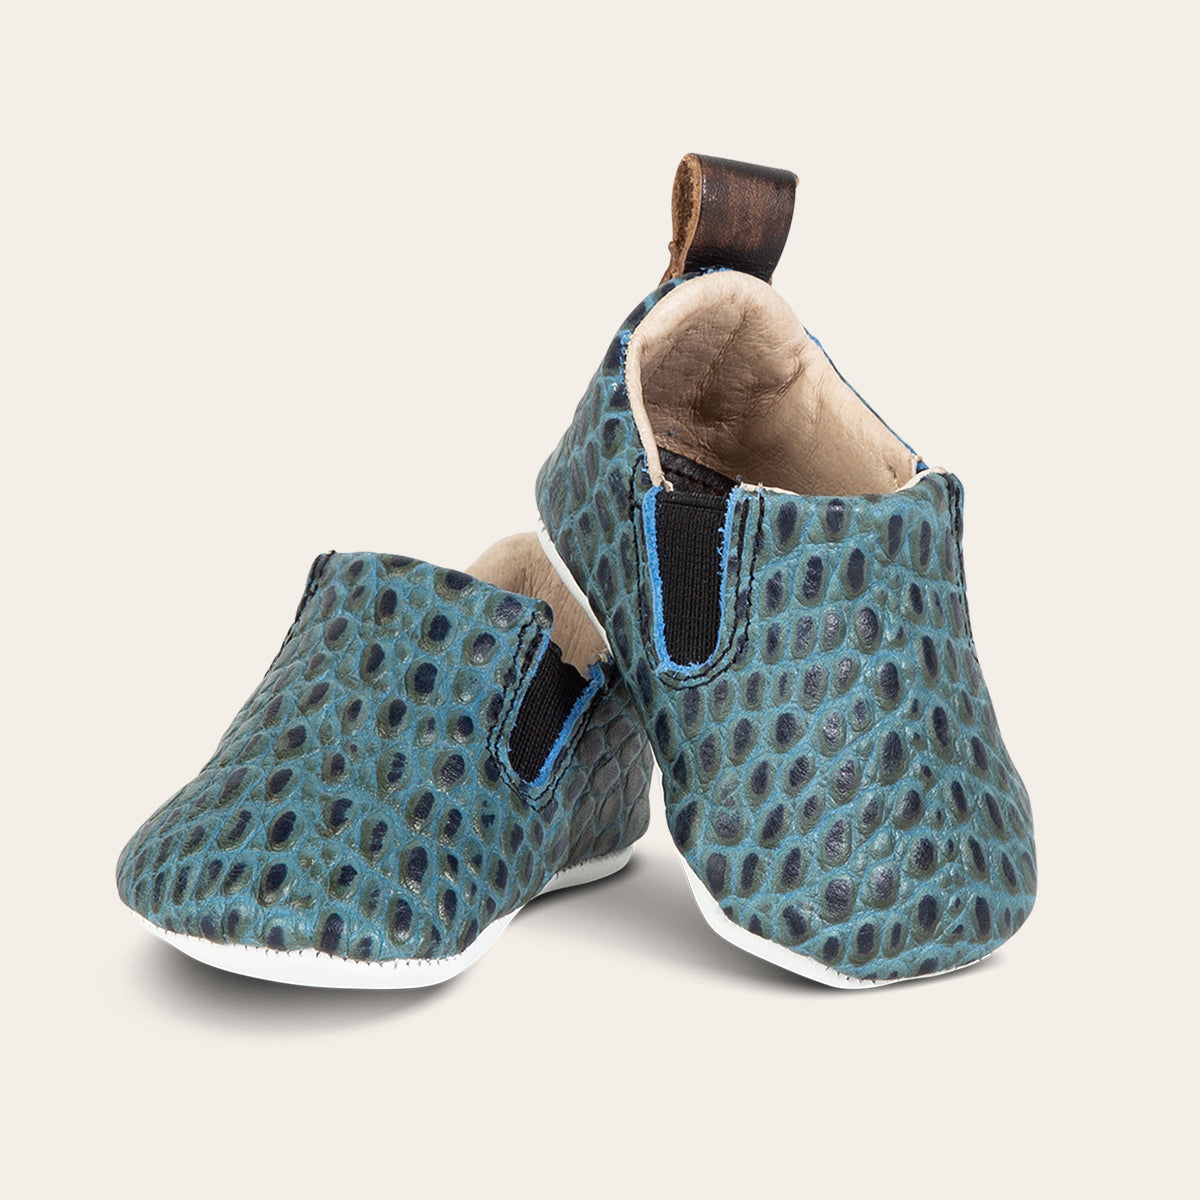 front view showing heel pull tab and side elastic panel on FREEBIRD infant baby kicks turquoise croco leather shoe